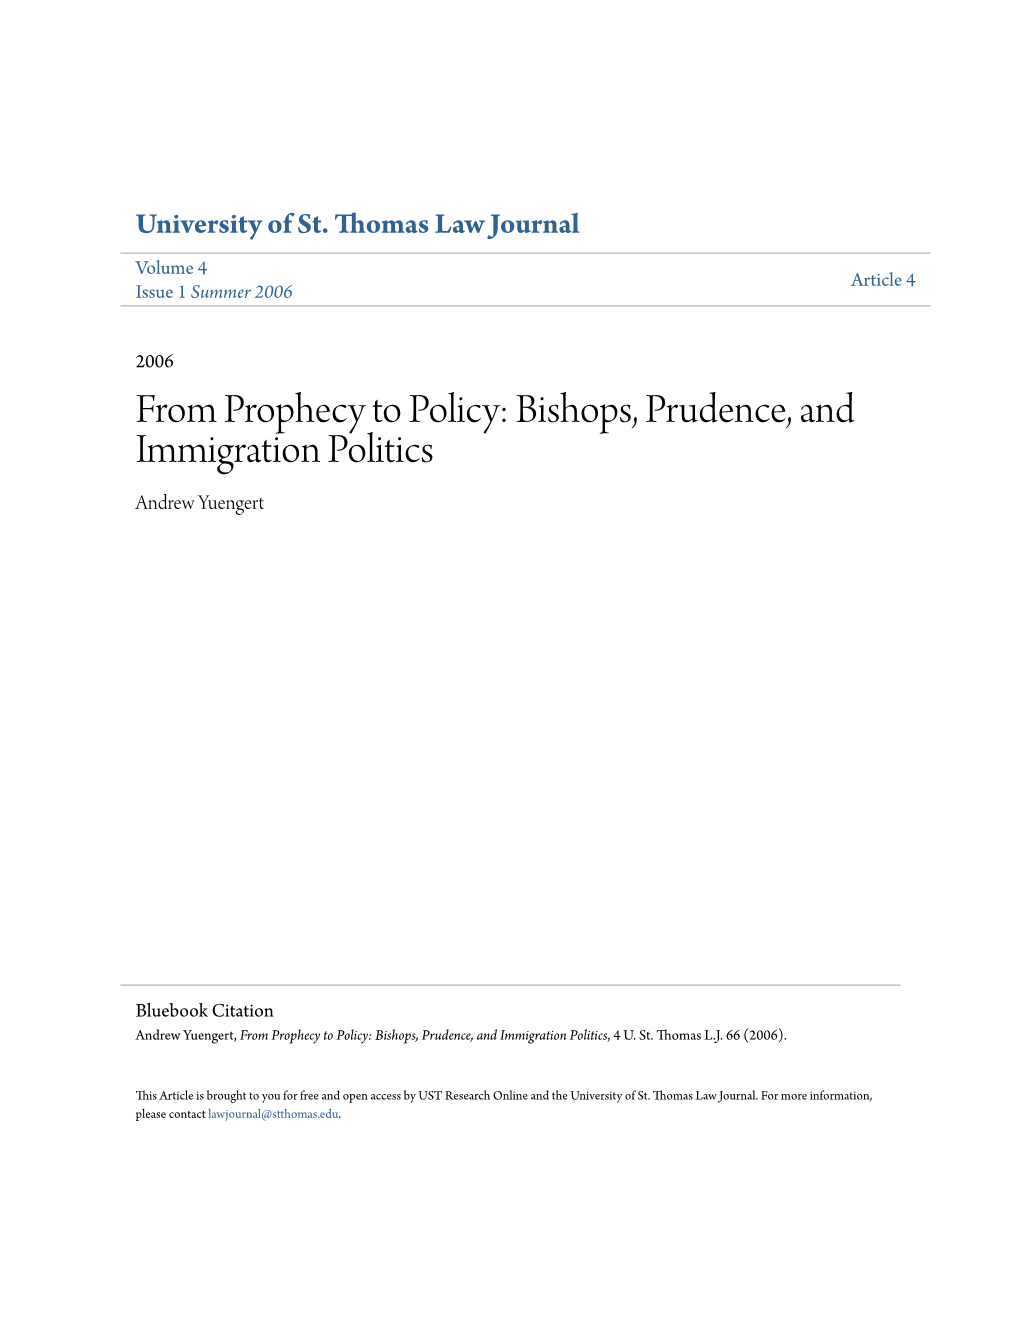 Bishops, Prudence, and Immigration Politics Andrew Yuengert